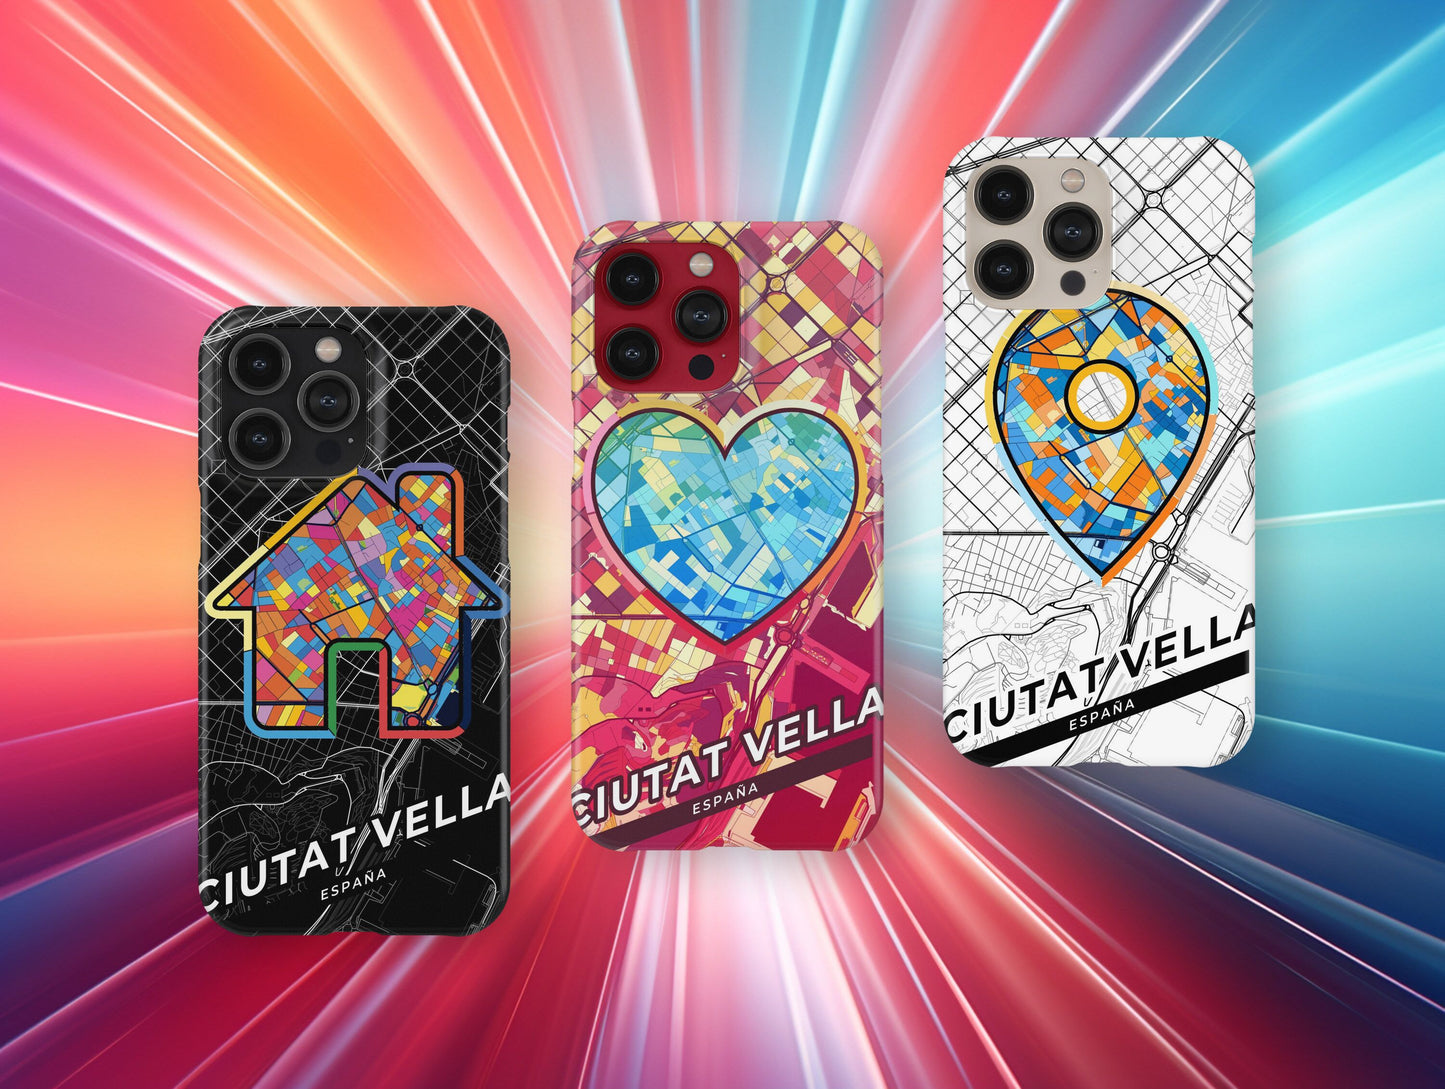 Ciutat Vella Spain slim phone case with colorful icon. Birthday, wedding or housewarming gift. Couple match cases.